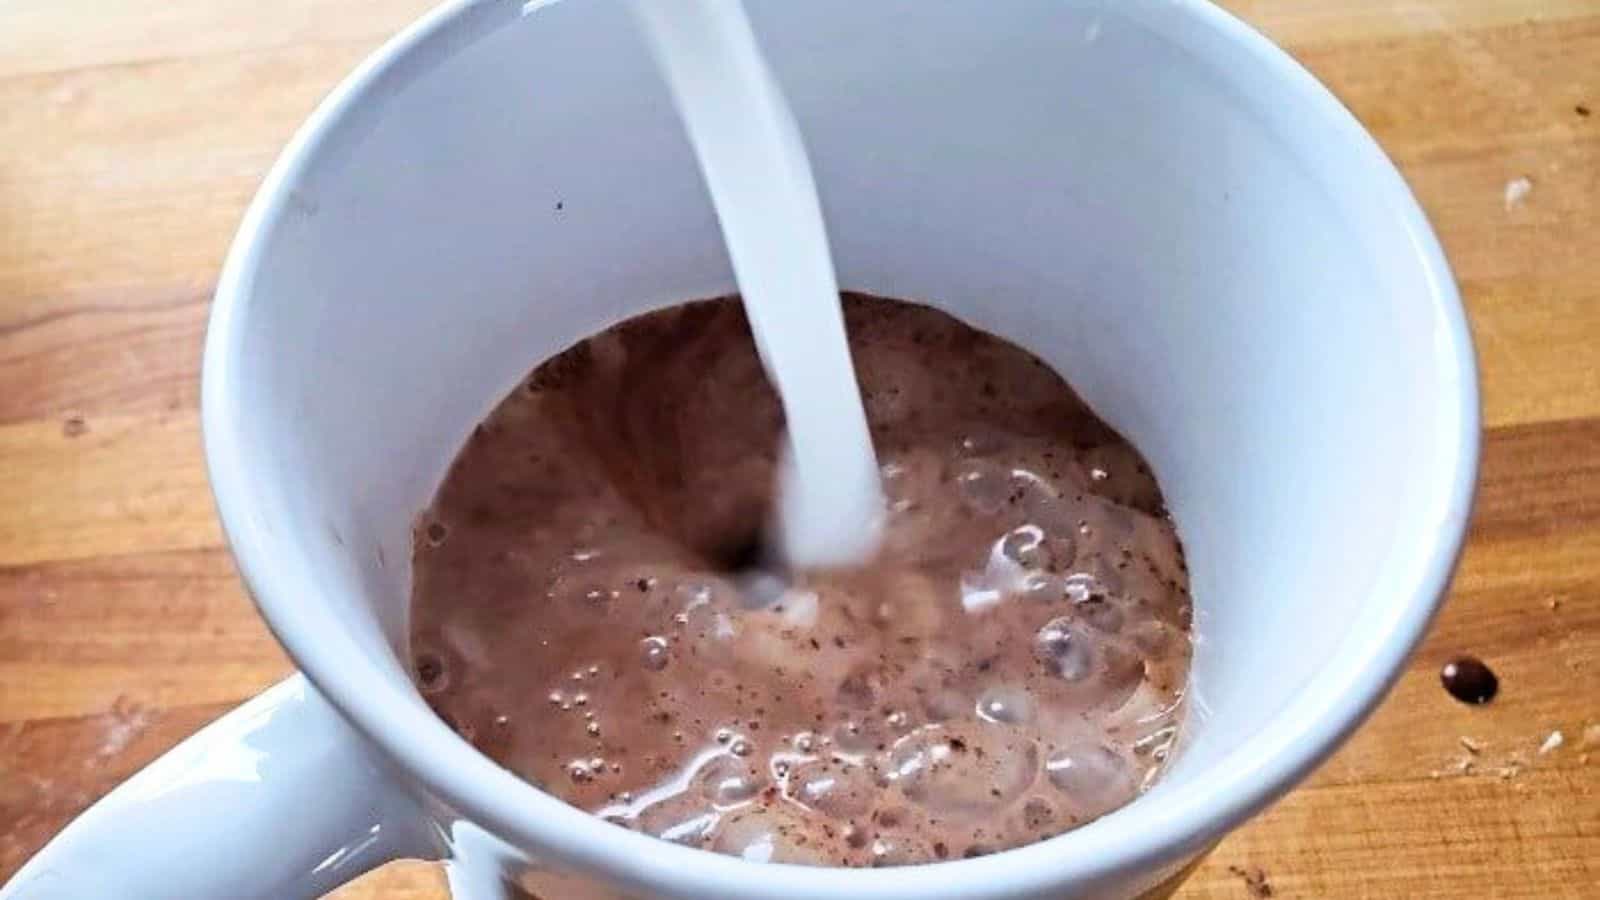 Image shows hot milk being poured into a mug with chocolat chaud base.